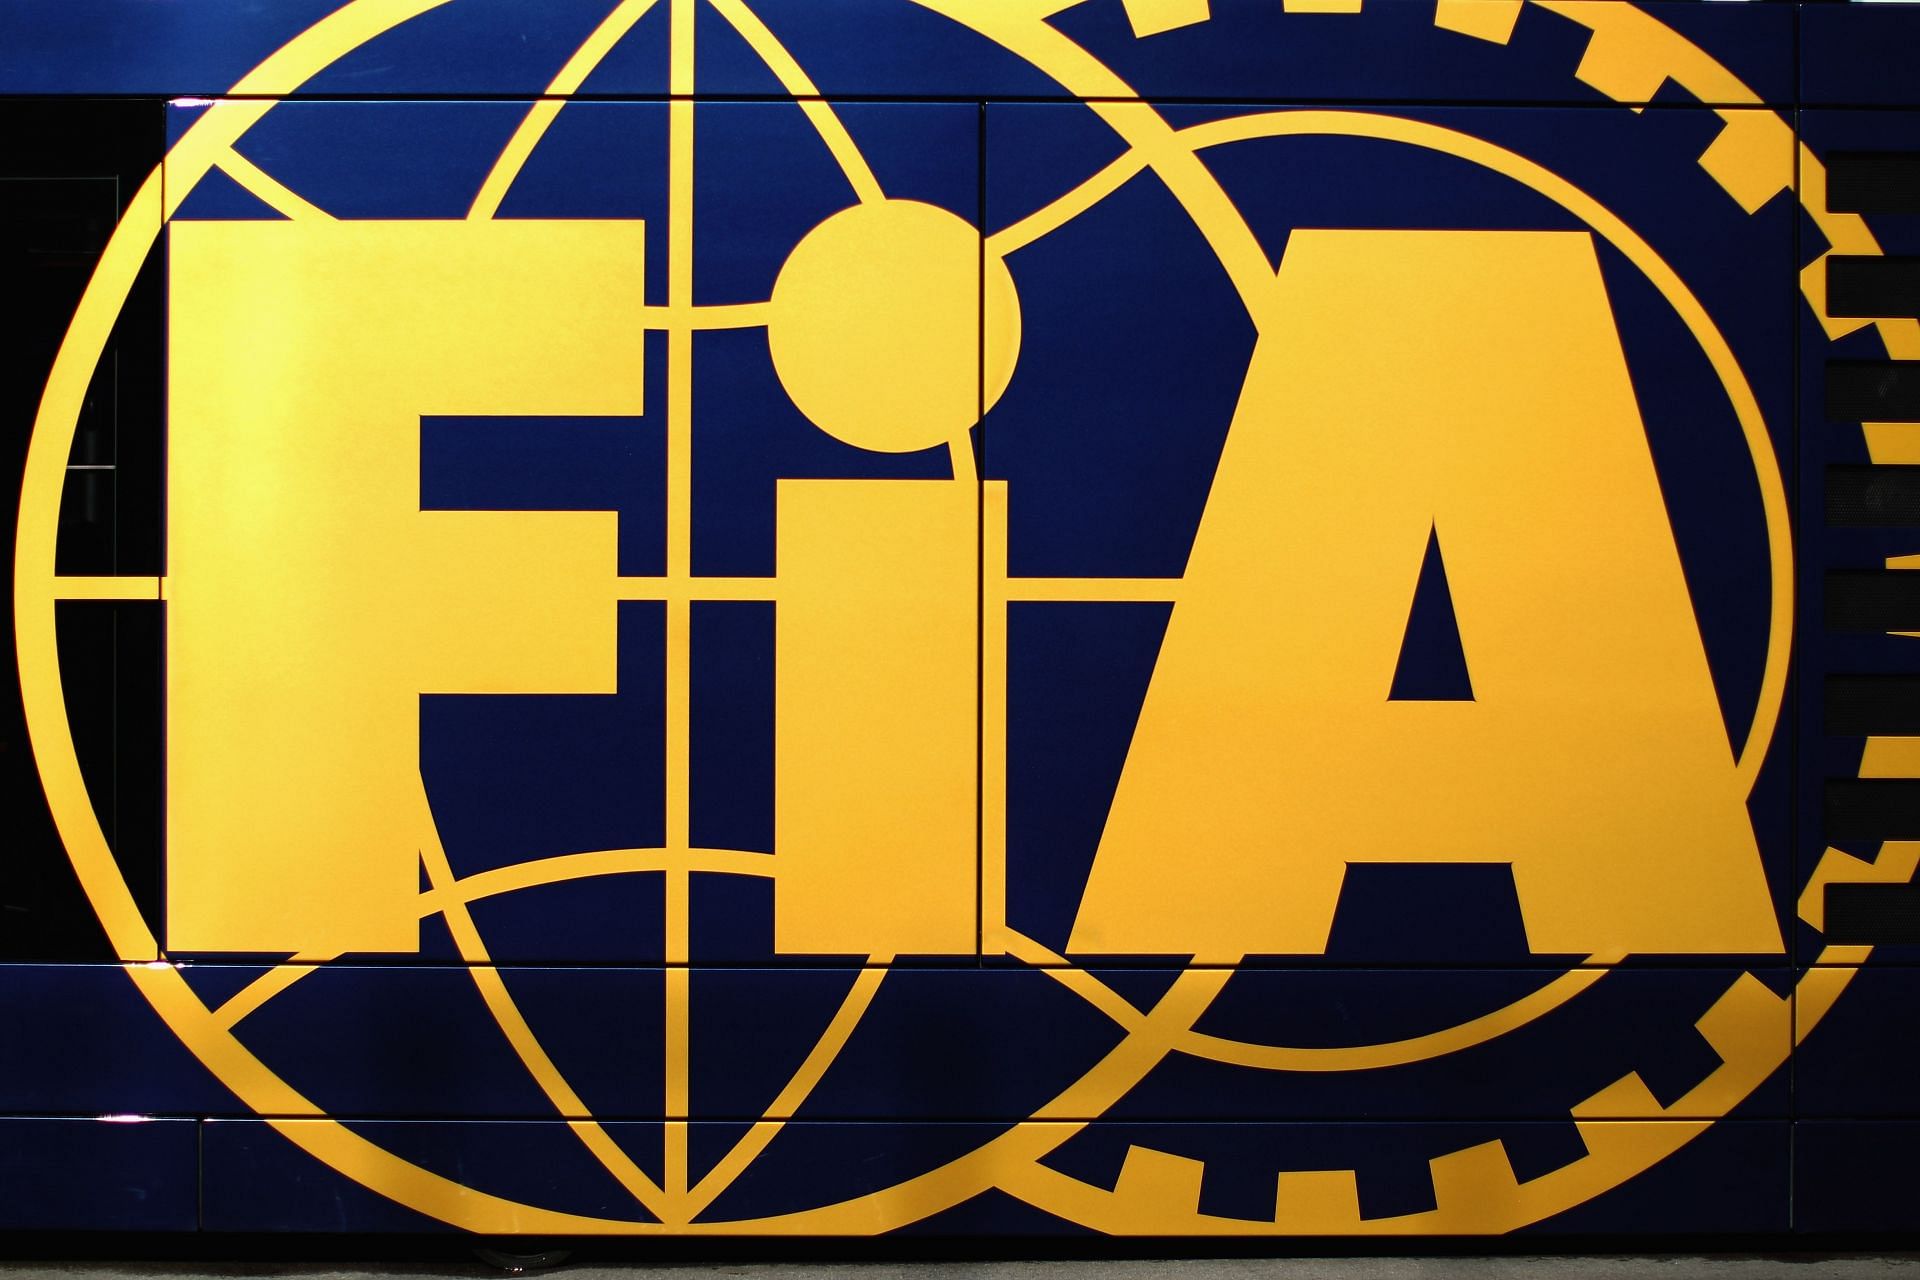 FIA logo is seen during practice for the 2011 Turkish Formula One Grand Prix at the Istanbul Park circuit (Photo by Mark Thompson/Getty Images)